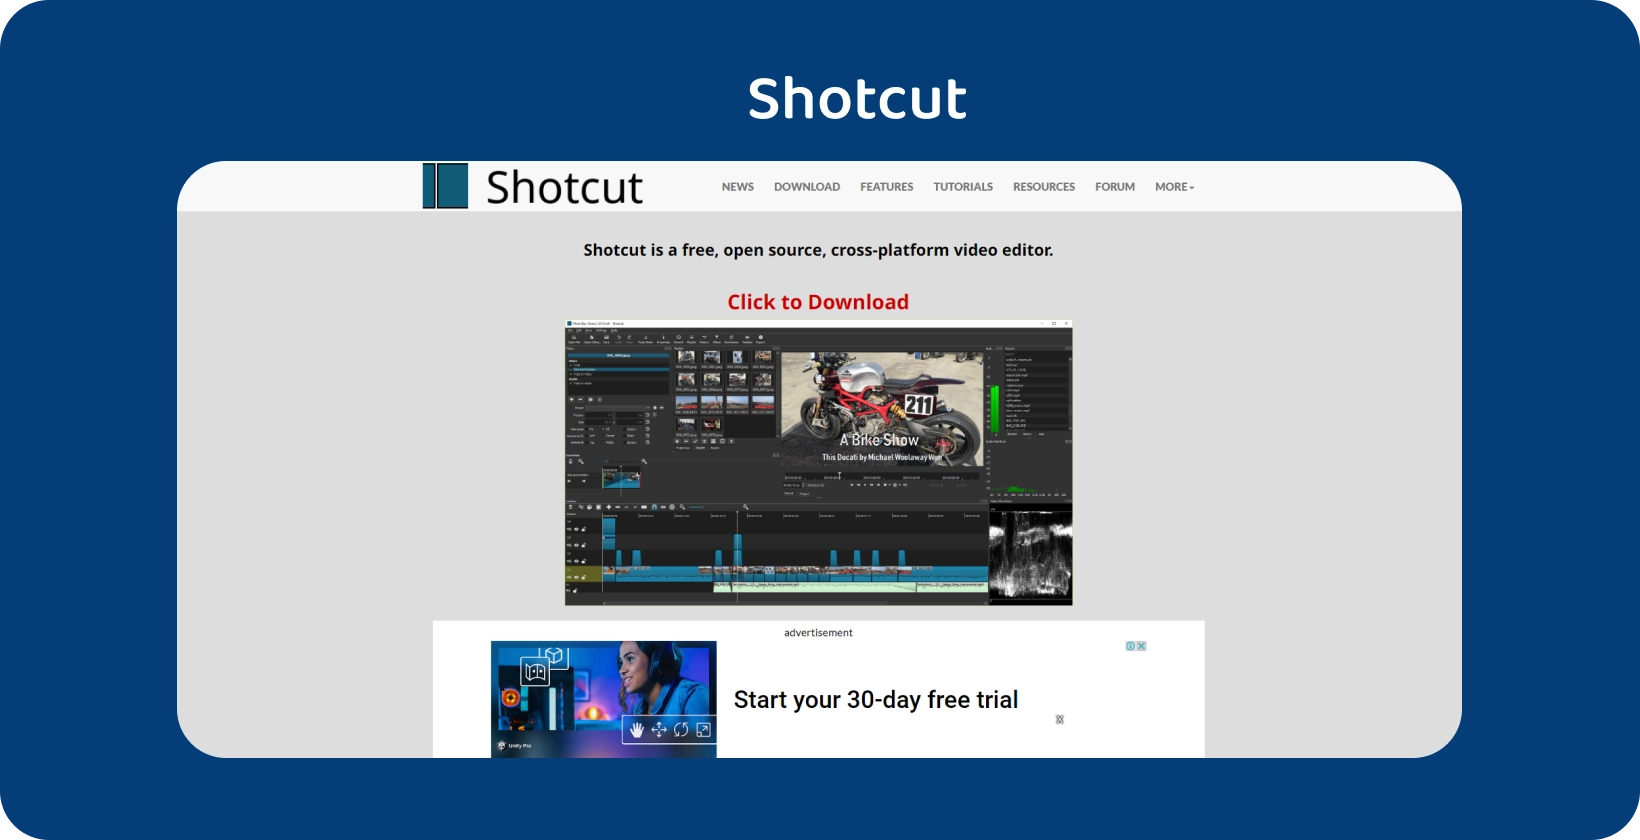 Shotcut editor interface: A detailed motorcycle video timeline with robust editing tools clearly displayed.